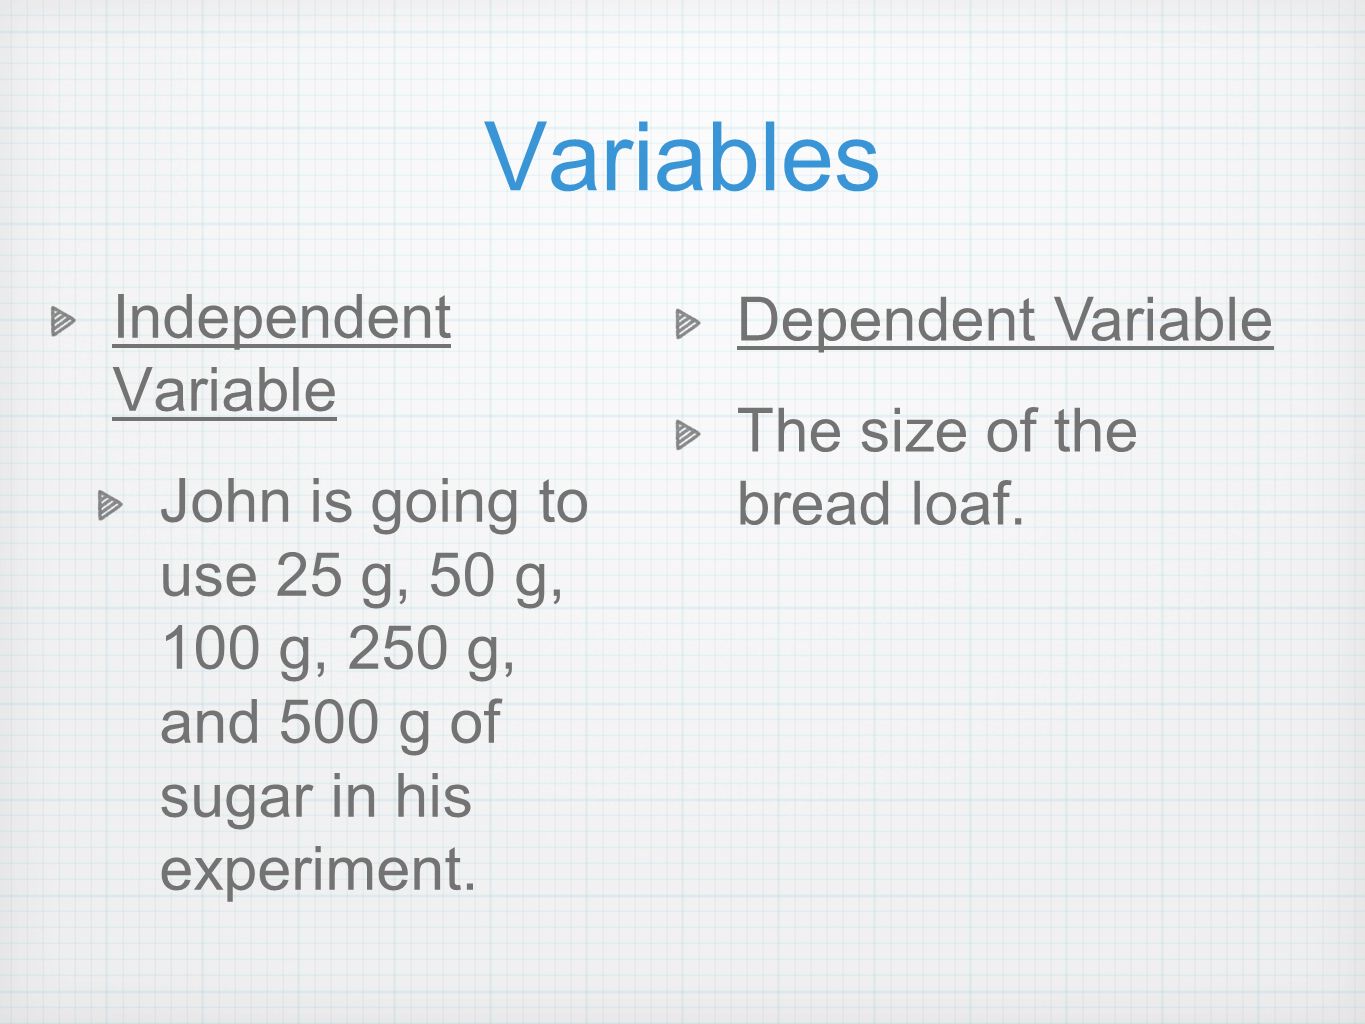 Variables Independent Variable John is going to use 25 g, 50 g, 100 g, 250 g, and 500 g of sugar in his experiment.